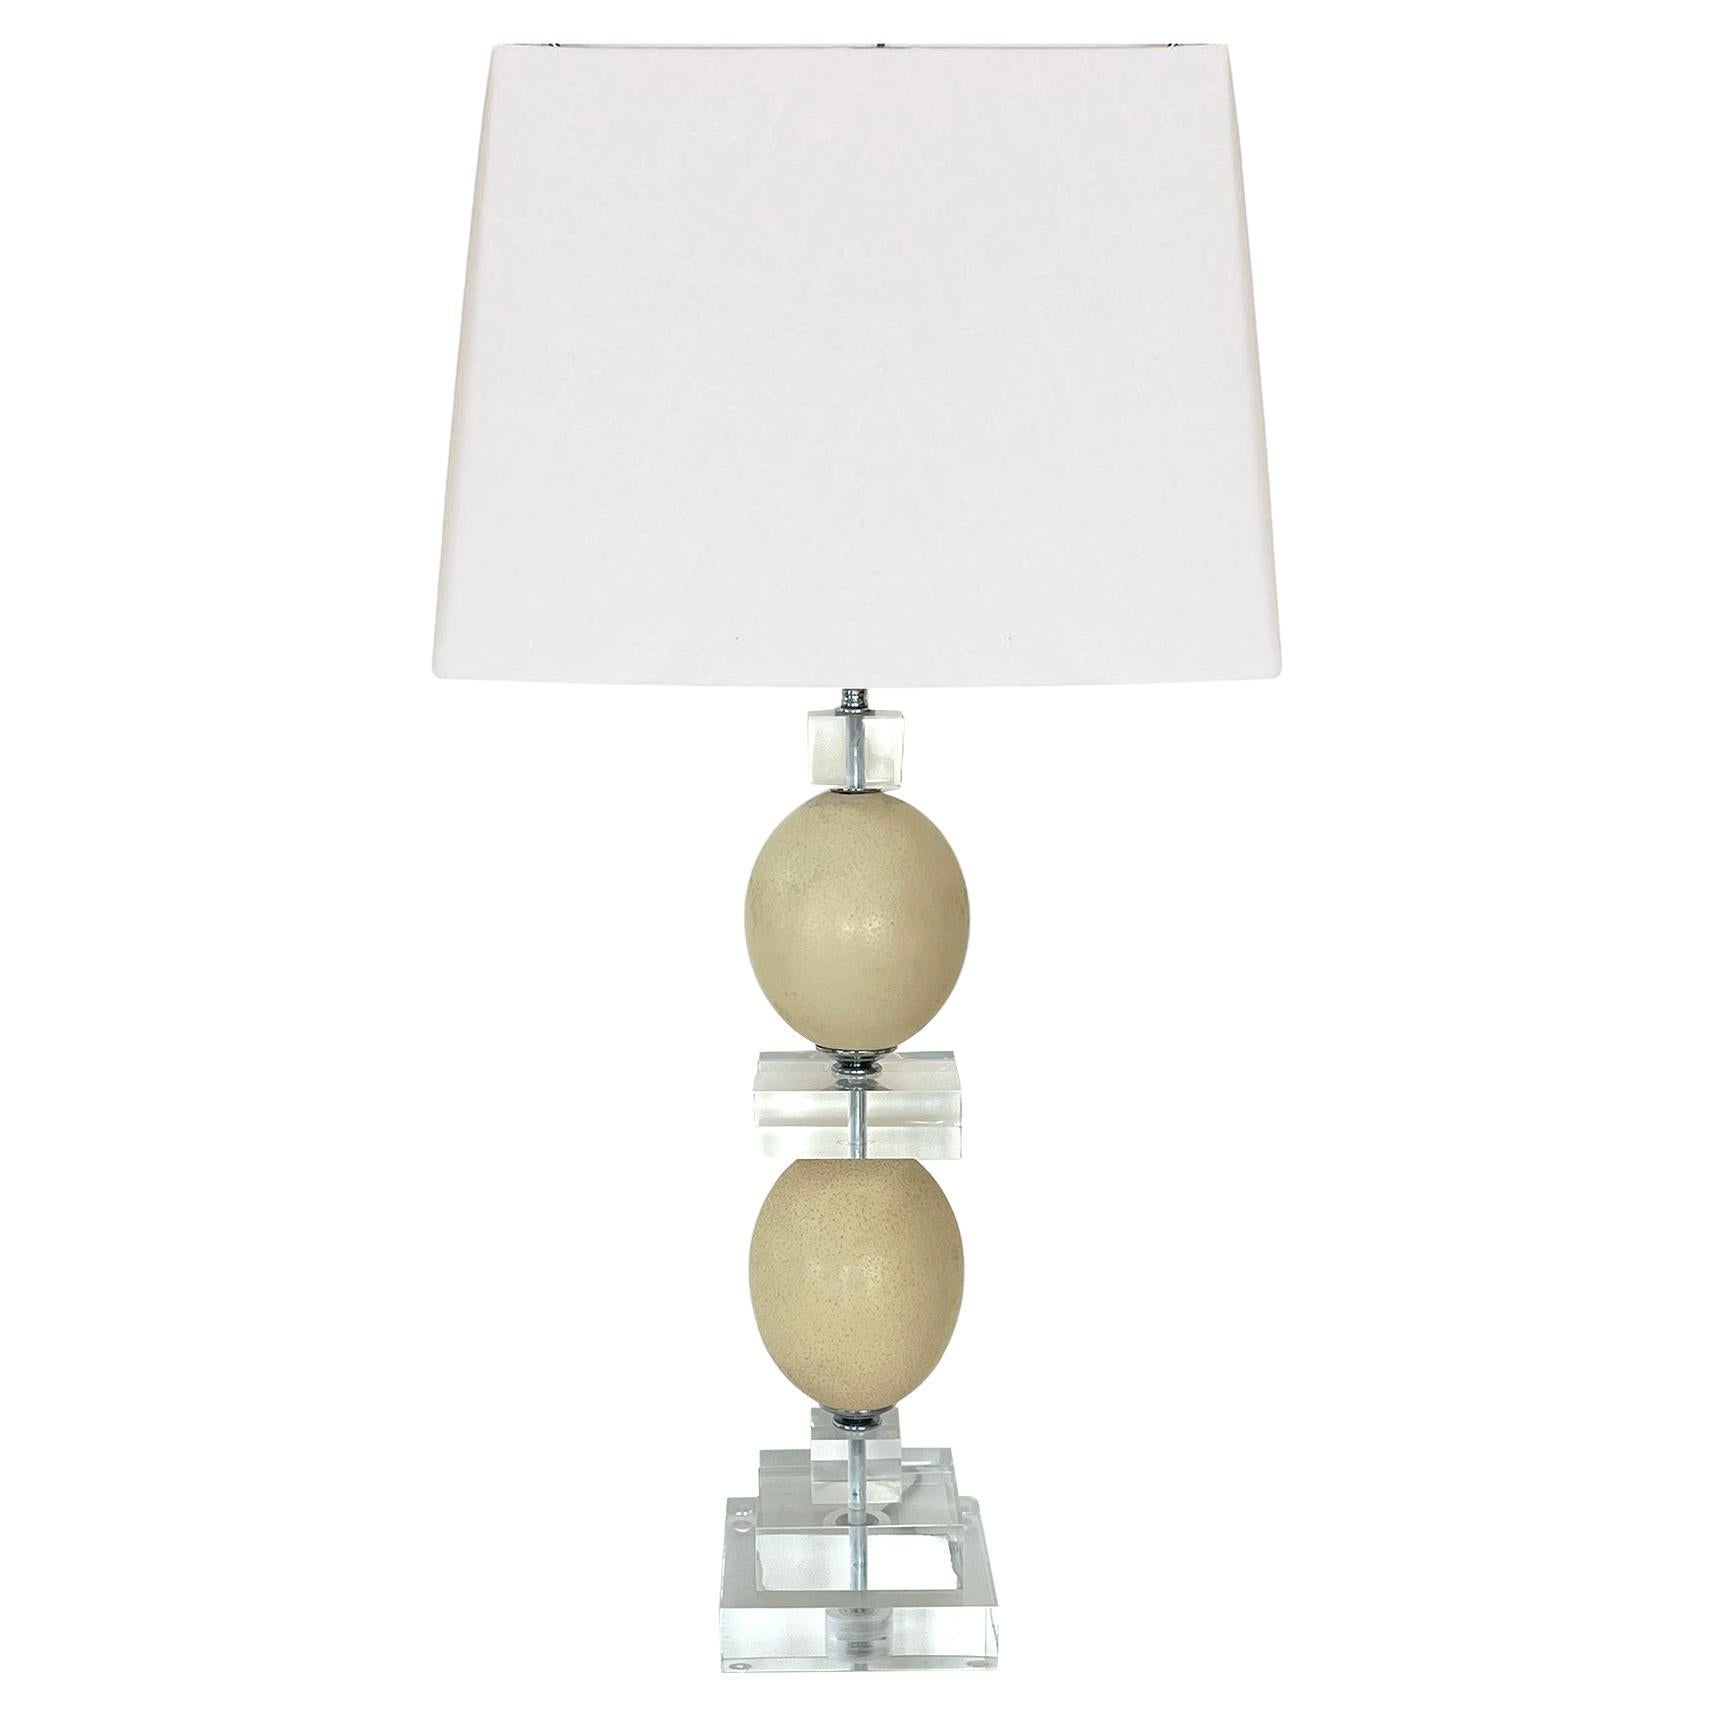 A Tall and Striking Ostrich Egg and Lucite Table Lamp